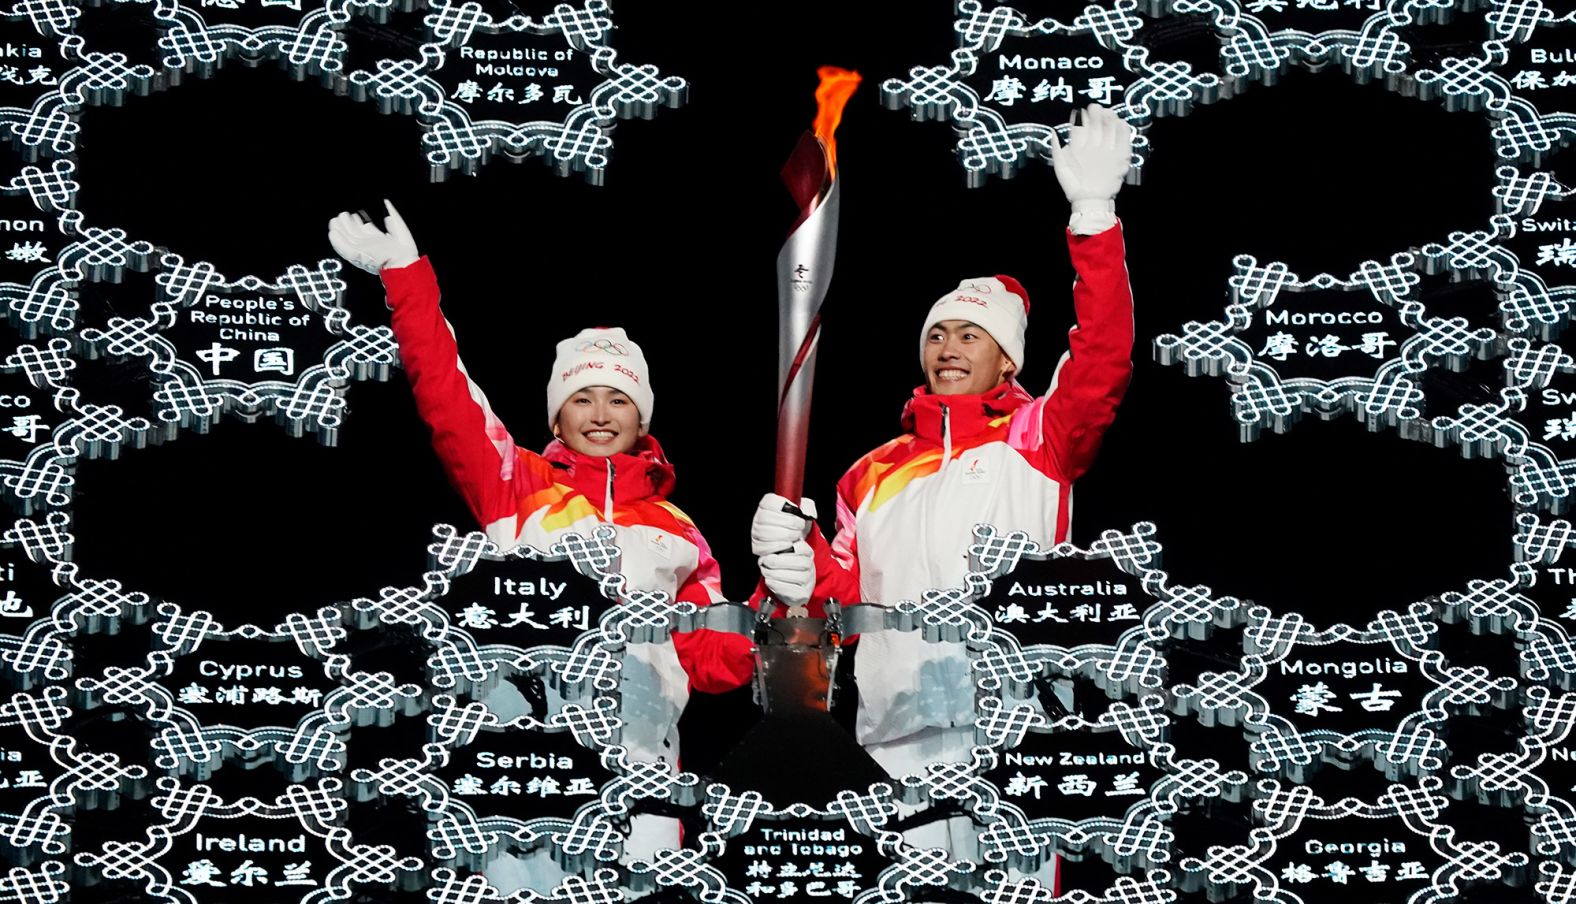 Chinese athletes Dinigeer Yilamujian, left, and Zhao Jiawen wave as they place the Olympic flame into a giant snowflake during the <a href="index.php?page=&url=http%3A%2F%2Fwww.cnn.com%2F2022%2F02%2F04%2Fsport%2Fgallery%2Fopening-ceremony-beijing-winter-olympics%2Findex.html" target="_blank">opening ceremony</a> on February 4. The choice of Dinigeer and Zhao <a href="index.php?page=&url=https%3A%2F%2Fedition.cnn.com%2Fworld%2Flive-news%2Fbeijing-winter-olympics-2022-opening-ceremony-spt-intl-hnk%2Fh_4474af75fecfed6a2f010181e818974c" target="_blank">appeared symbolic and deliberate.</a> Dinigeer is a Uyghur, an ethnic minority in China's far west region of Xinjiang where China has been accused of massive human-rights violations. Zhao is of Han decent, the dominant ethnicity in China.